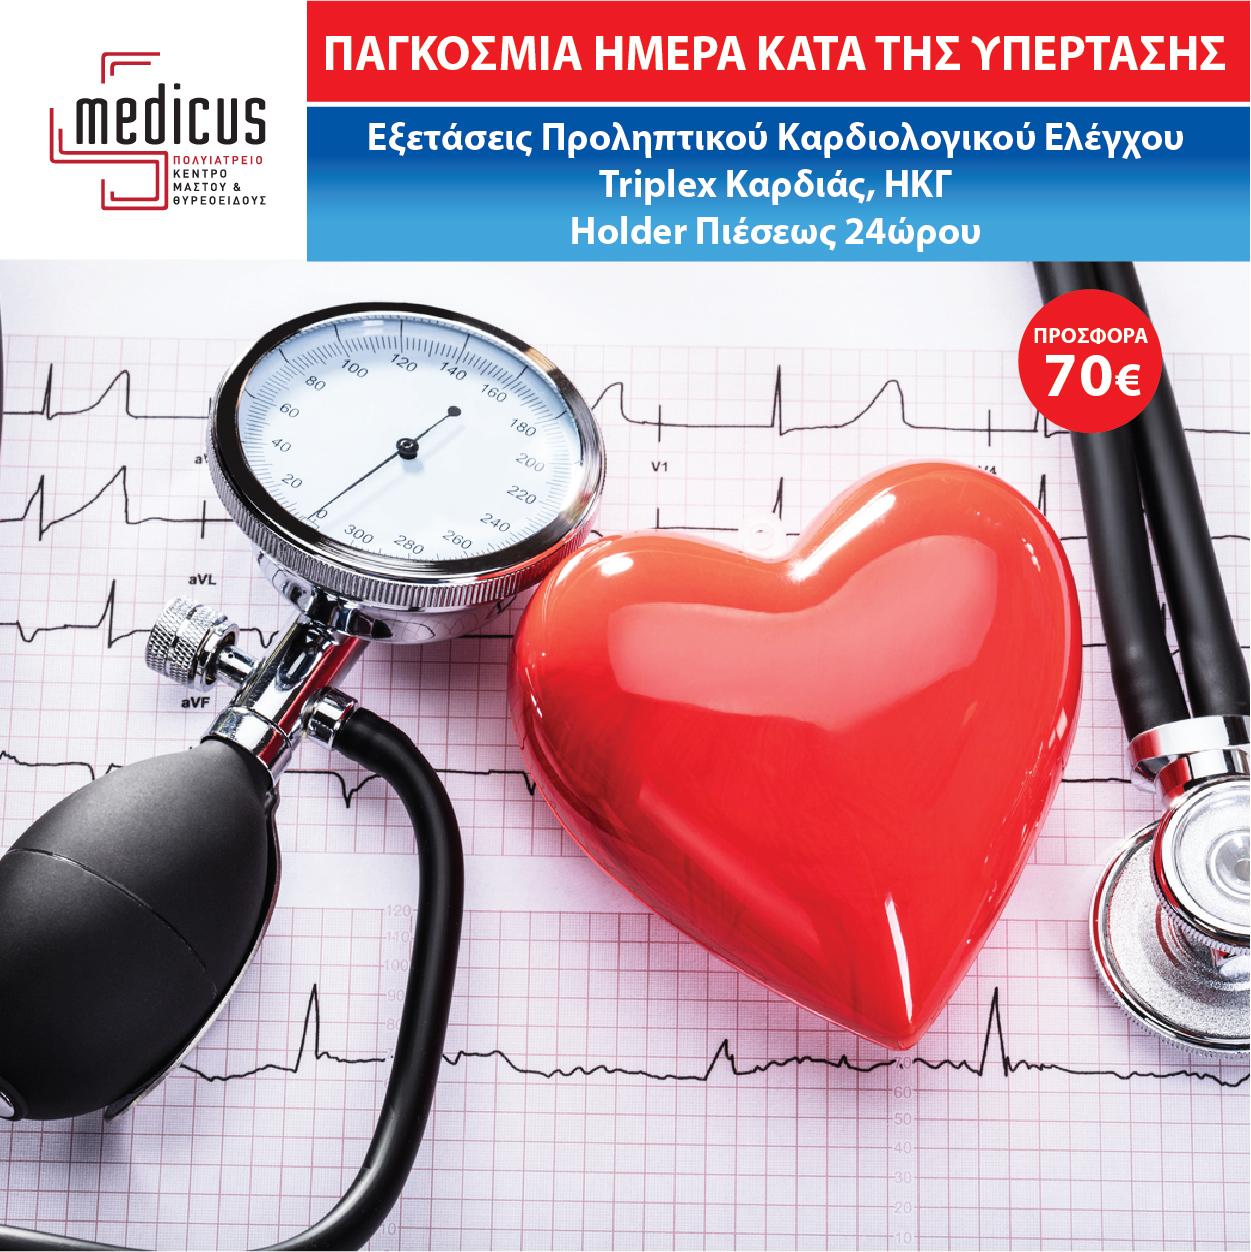 cardiac hypertension checkup for the month of May